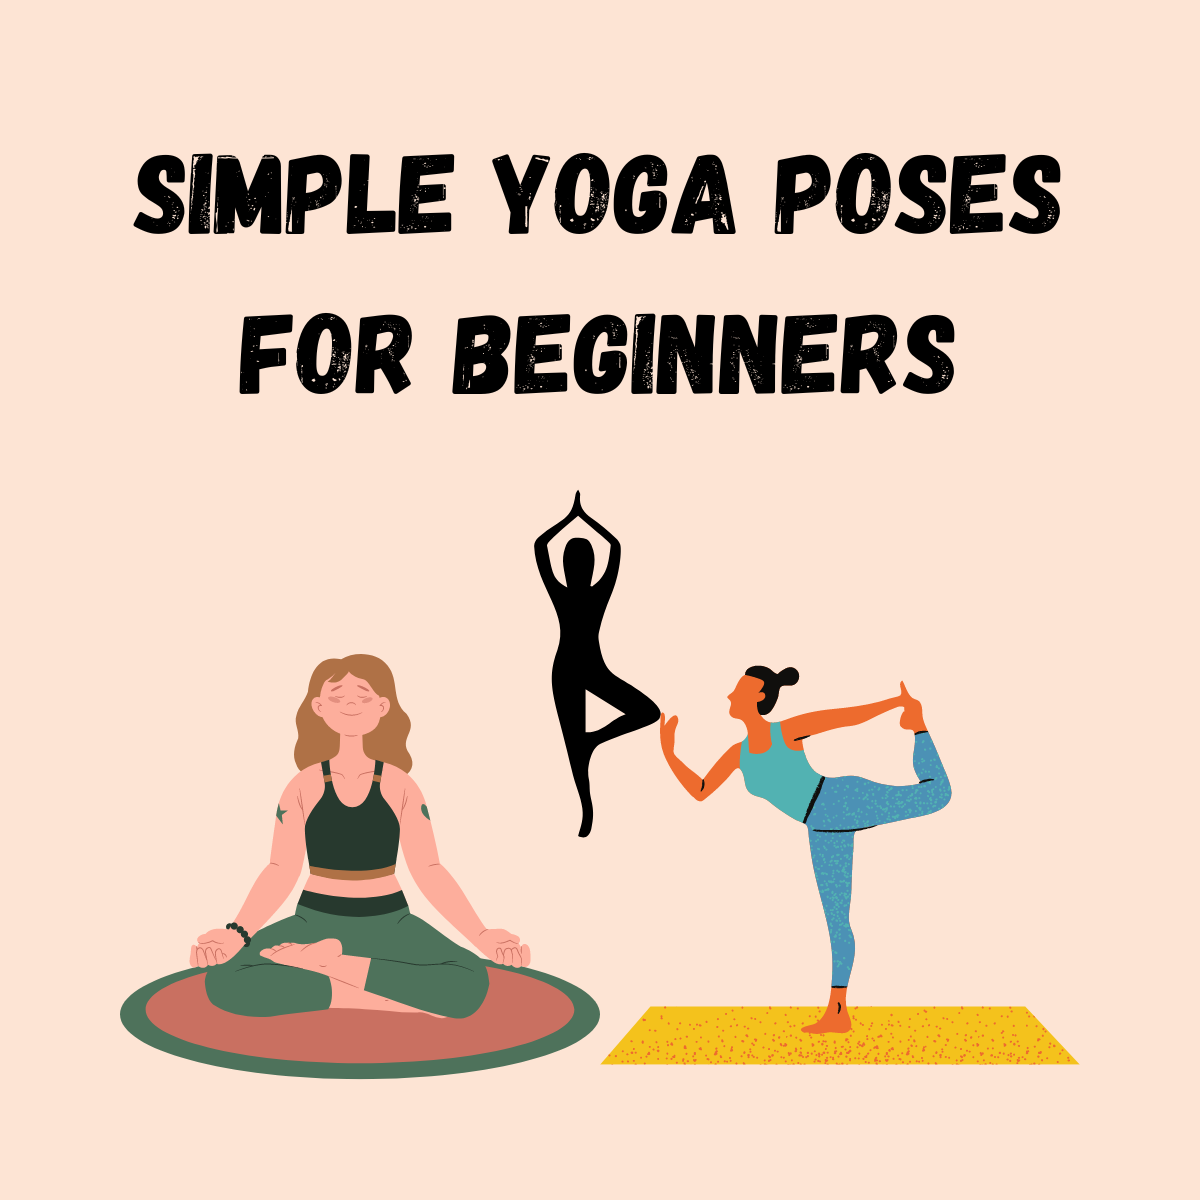 Simple Yoga Poses for beginners